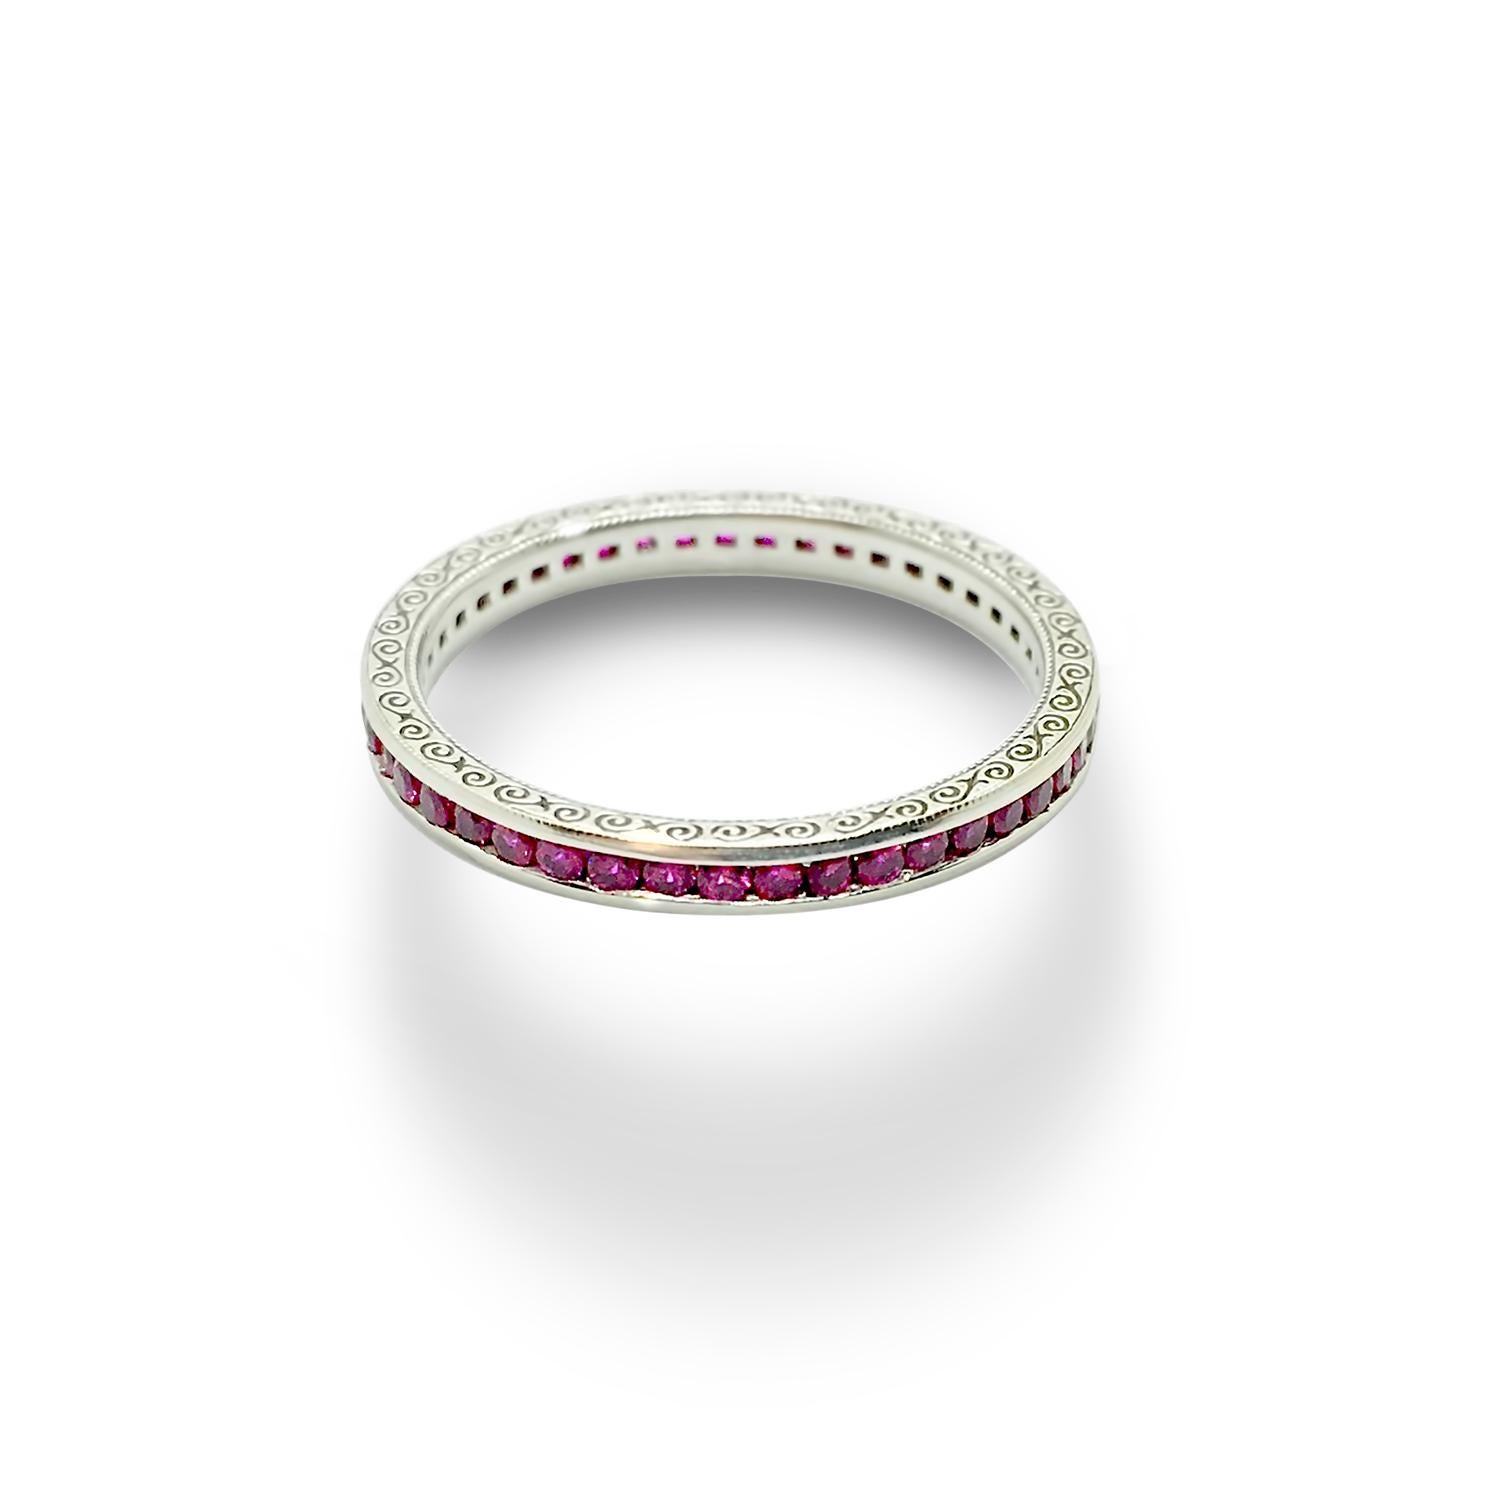 Experience everlasting love and celebrate cherished moments with our Ruby Eternity Band in 14k White Gold. This remarkable ring captures the essence of eternal bliss and serves as a symbol of unending devotion.

Crafted with meticulous care, this